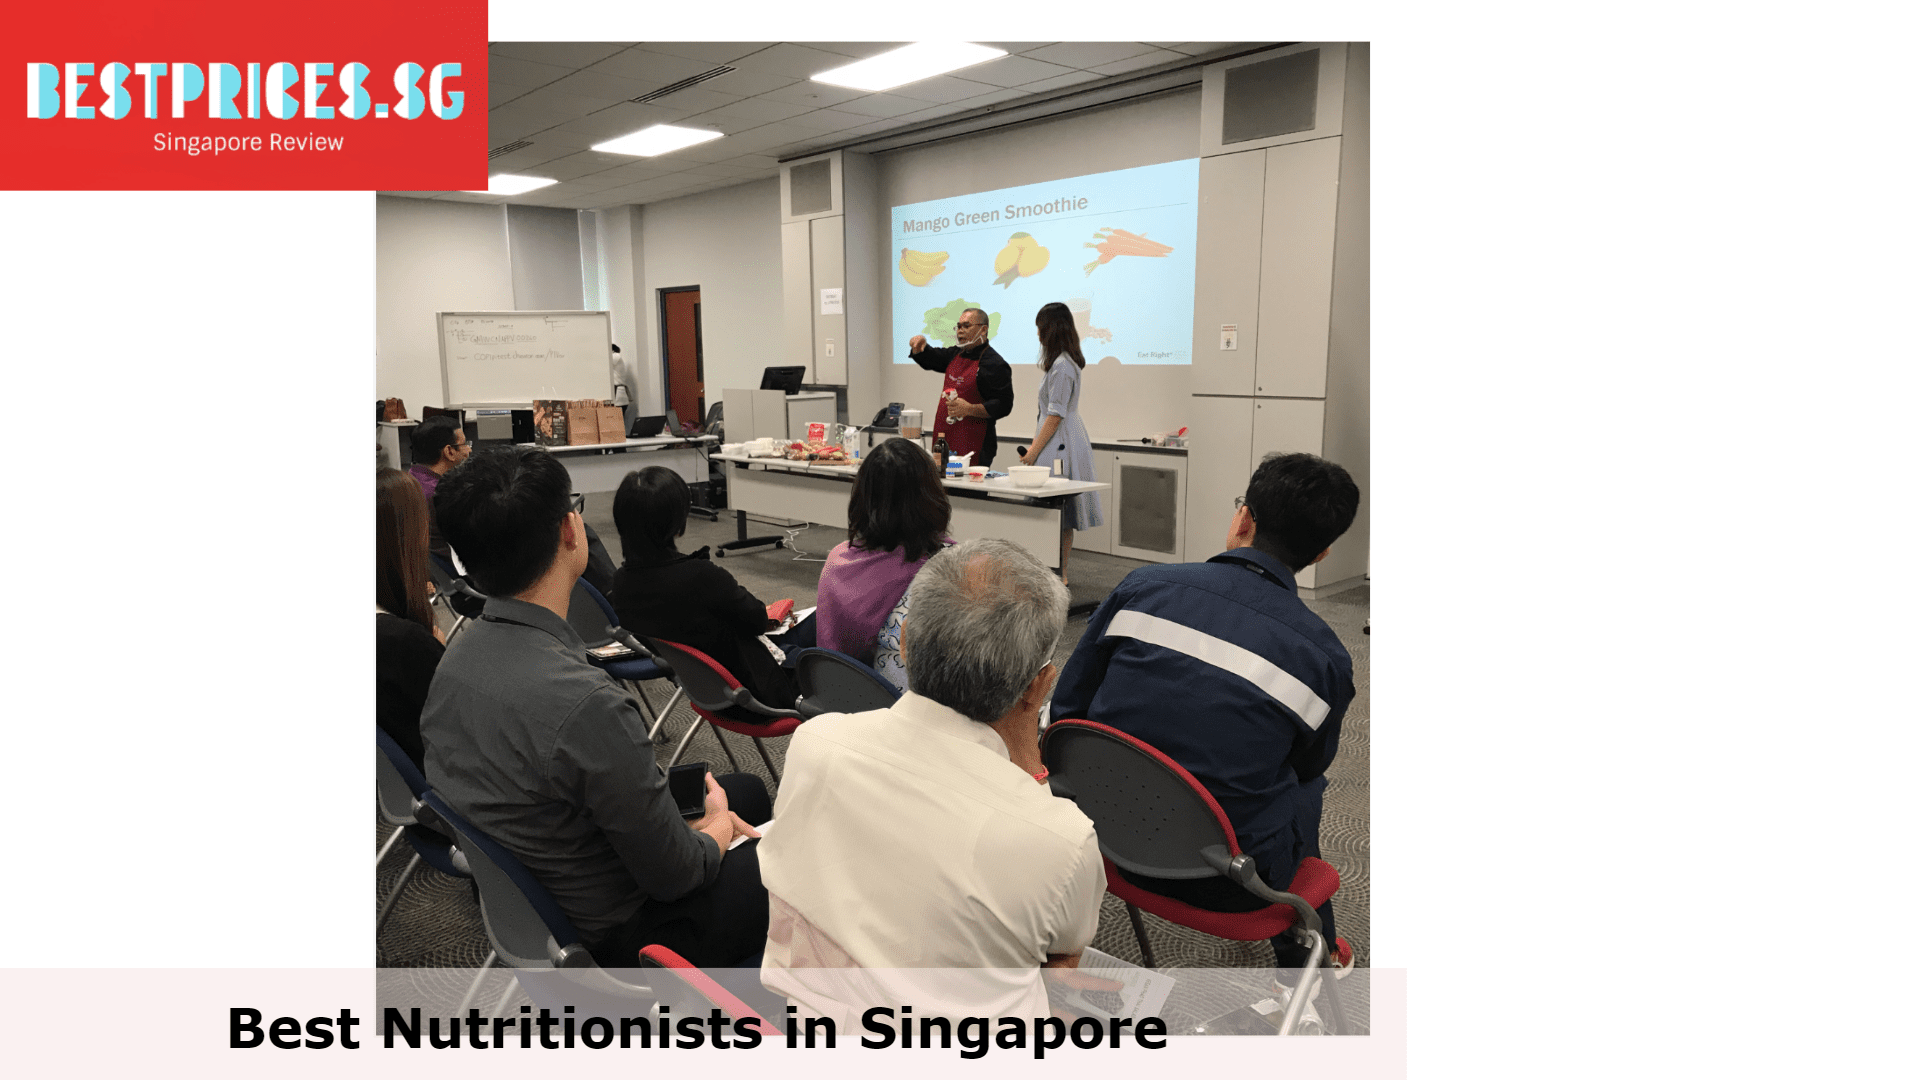 Eat Right Nutrition Consultancy - Nutritionists Singapore, Nutritionist Singapore, What does a nutritionist do Singapore?, What is the difference between a dietician and a nutritionist?, Is it worth seeing a nutritionist?, How much does it cost to see a nutrition?, Nutrition Dietetics, Nutritional Therapy, nutritionist singapore salary, nutritionist singapore course, weight loss nutritionist singapore, nutritionist singapore job, sports nutritionist singapore, best nutritionist singapore, dietician vs nutritionist singapore, nutritionist singapore hospital, Are sports nutritionists in demand?, What is the role of a sports nutritionist?, Is a sports nutritionist a good job?, How do I become a nutritionist in Singapore?, Which course is best for nutrition?, Where can I see a dietitian in Singapore?, 